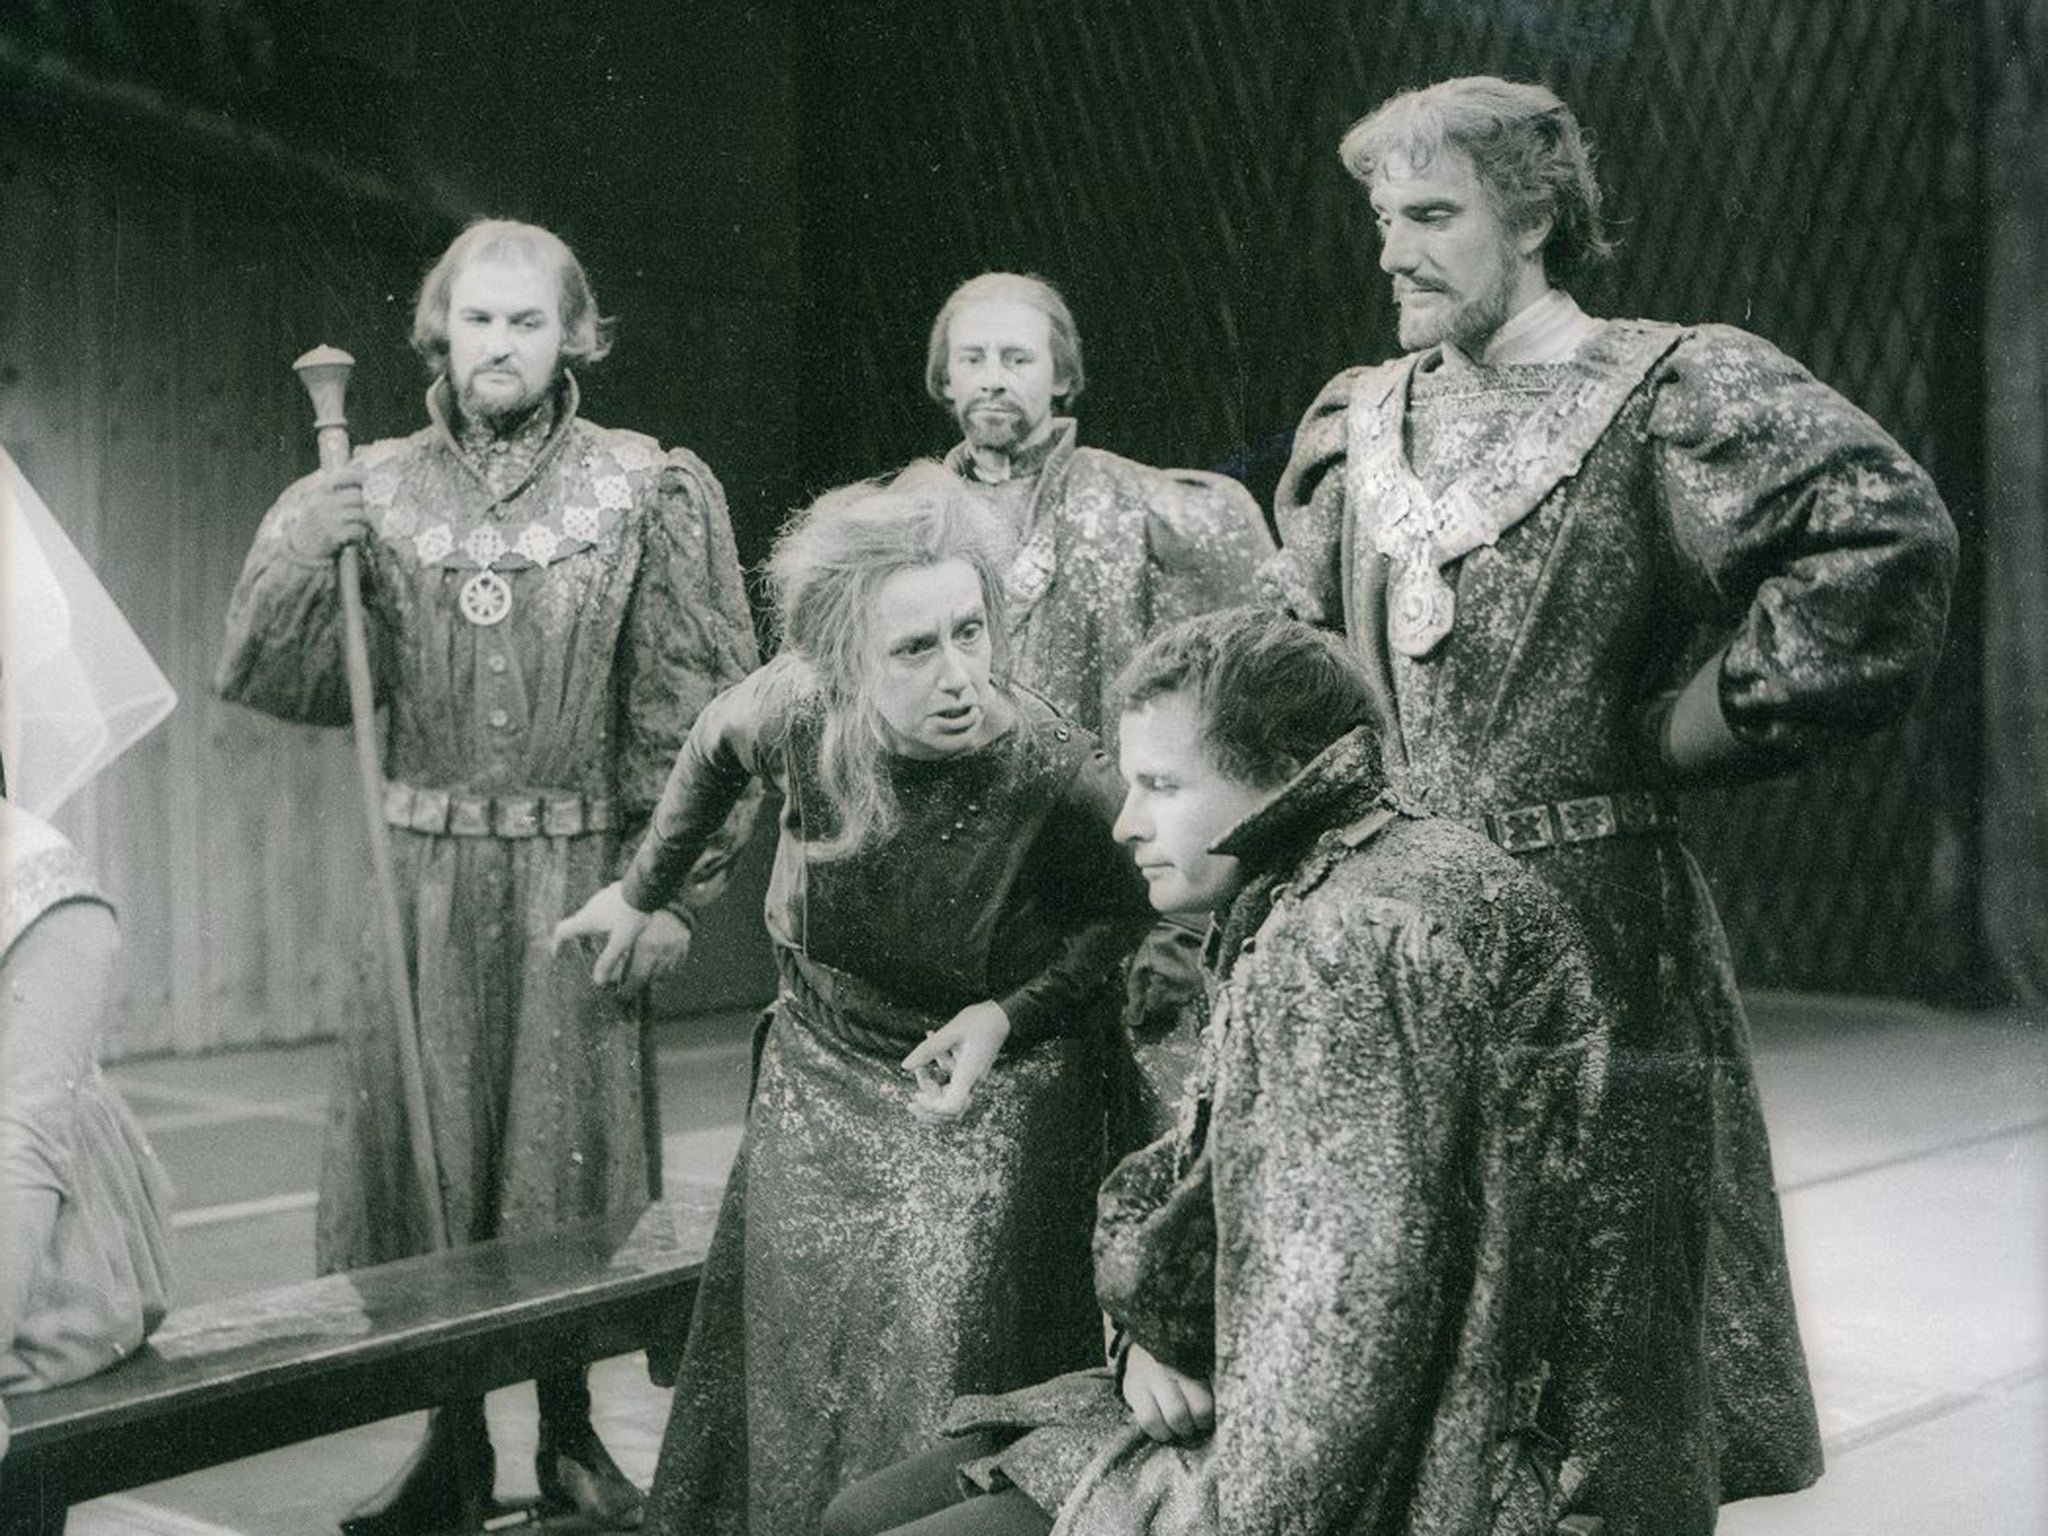 Ian Holm with Dame Peggy Ashcroft in the BBC broadcast Royal Shakespeare Company